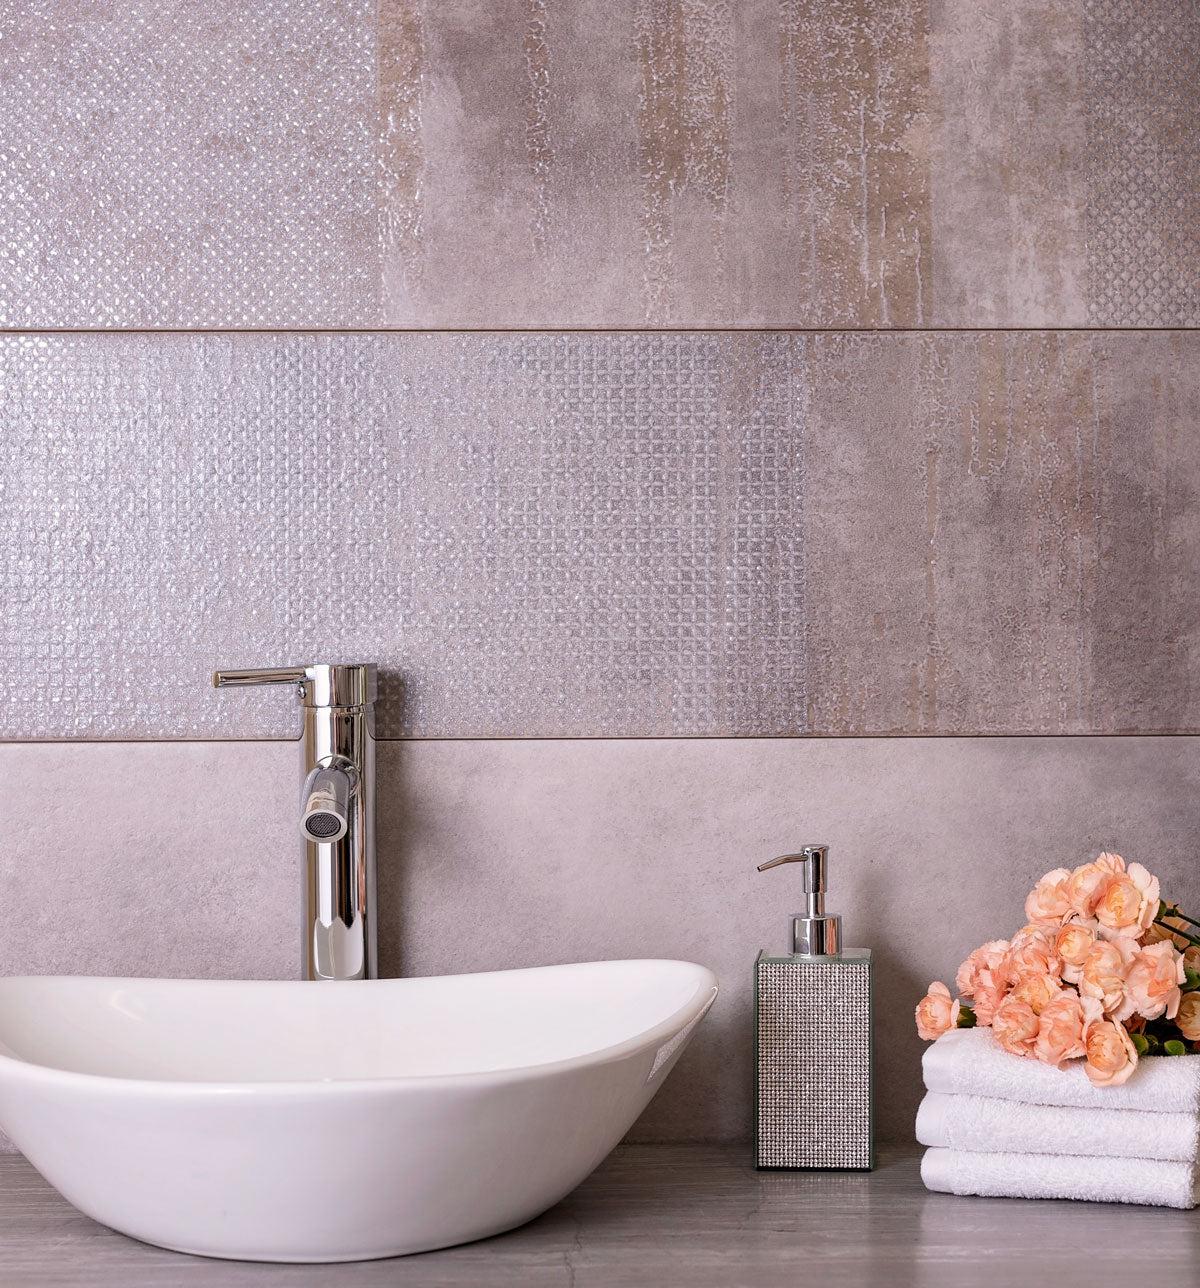 Dec. Constellation Grey Porcelain Tile with a metallic rinse